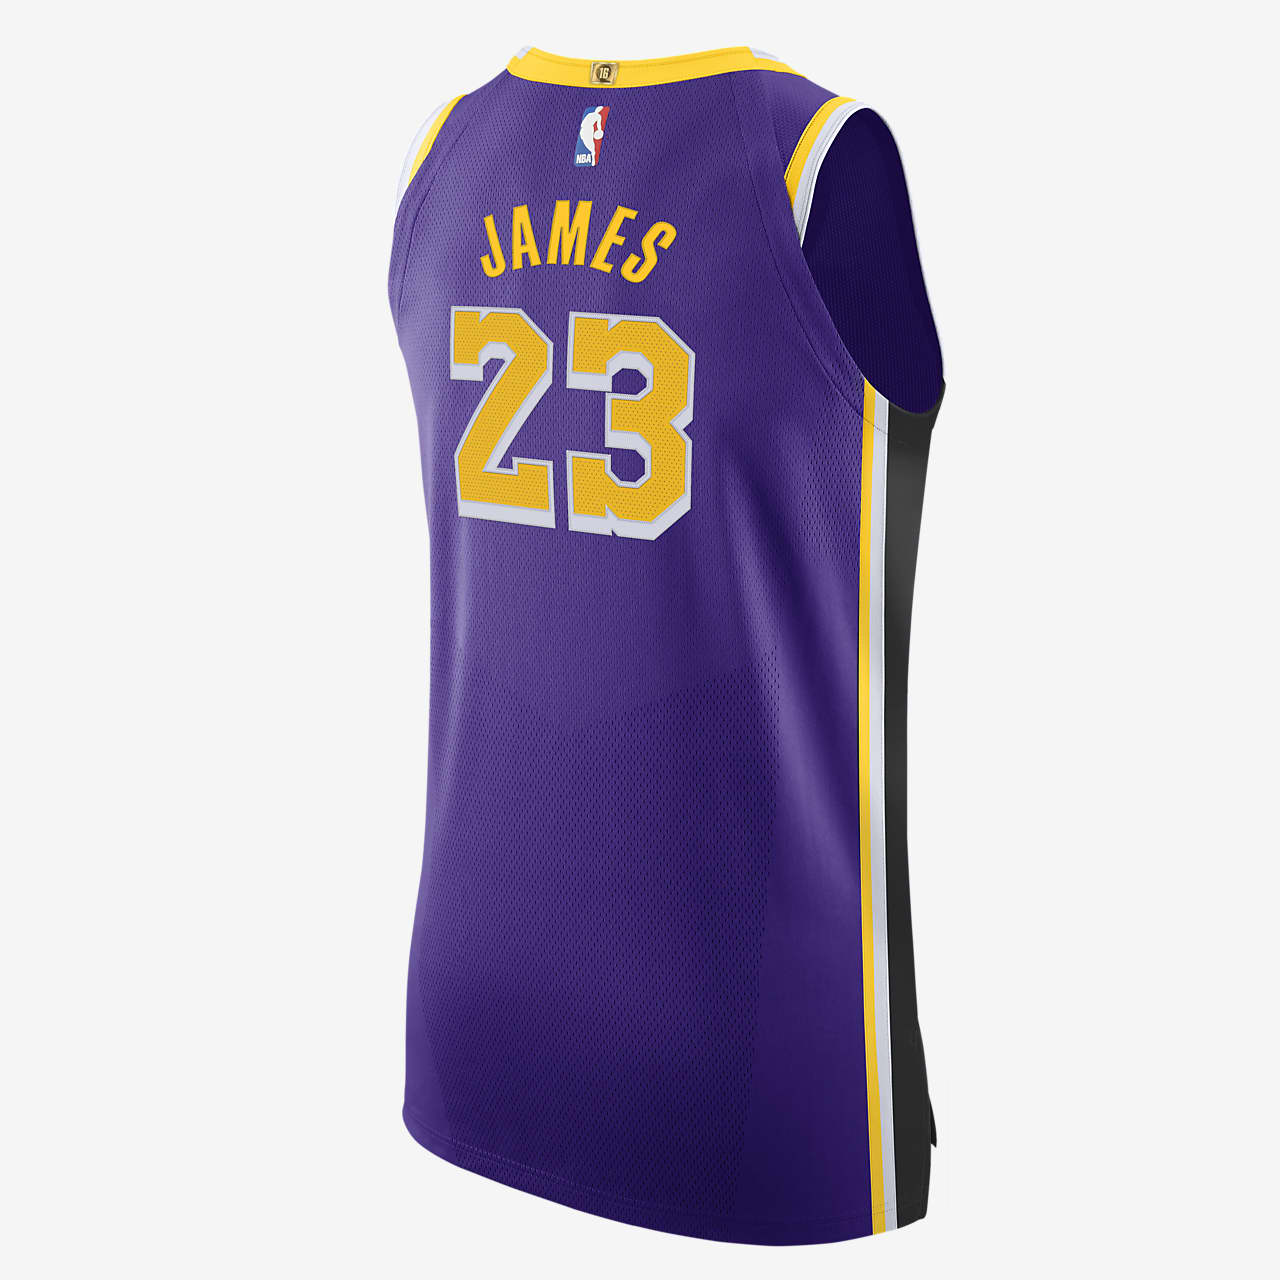 lebron james lakers jersey stitched Off 63% - www.bashhguidelines.org